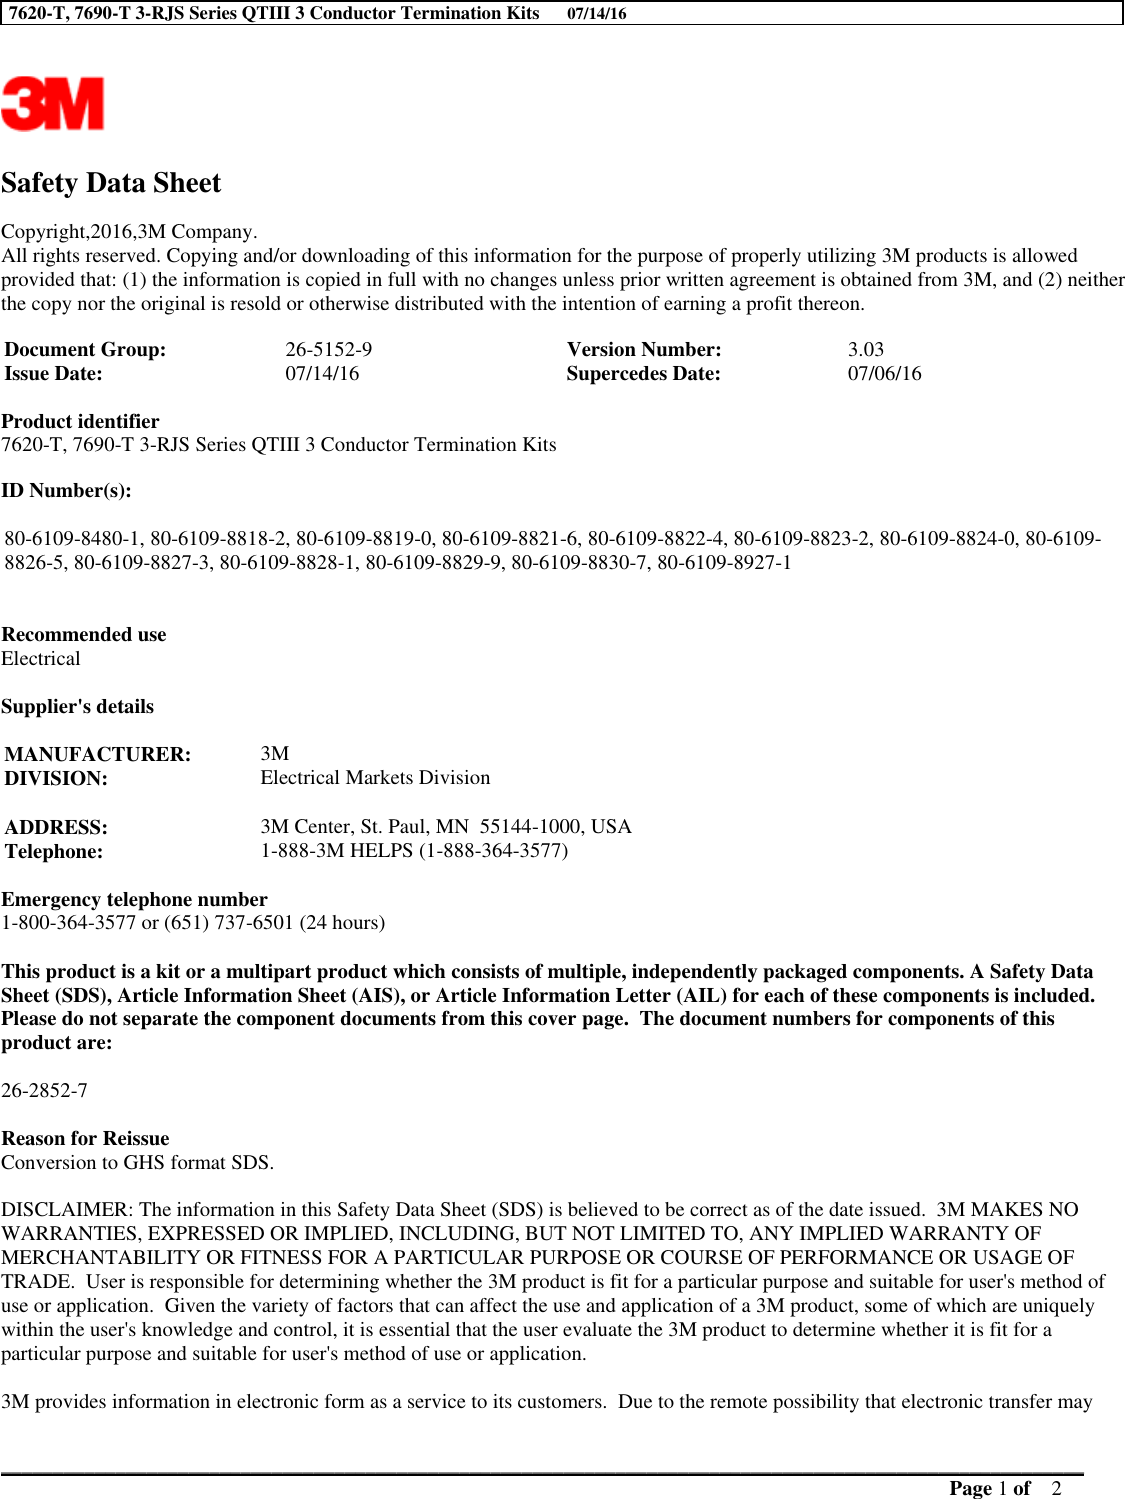 Page 1 of 12 - 127200-MSDS